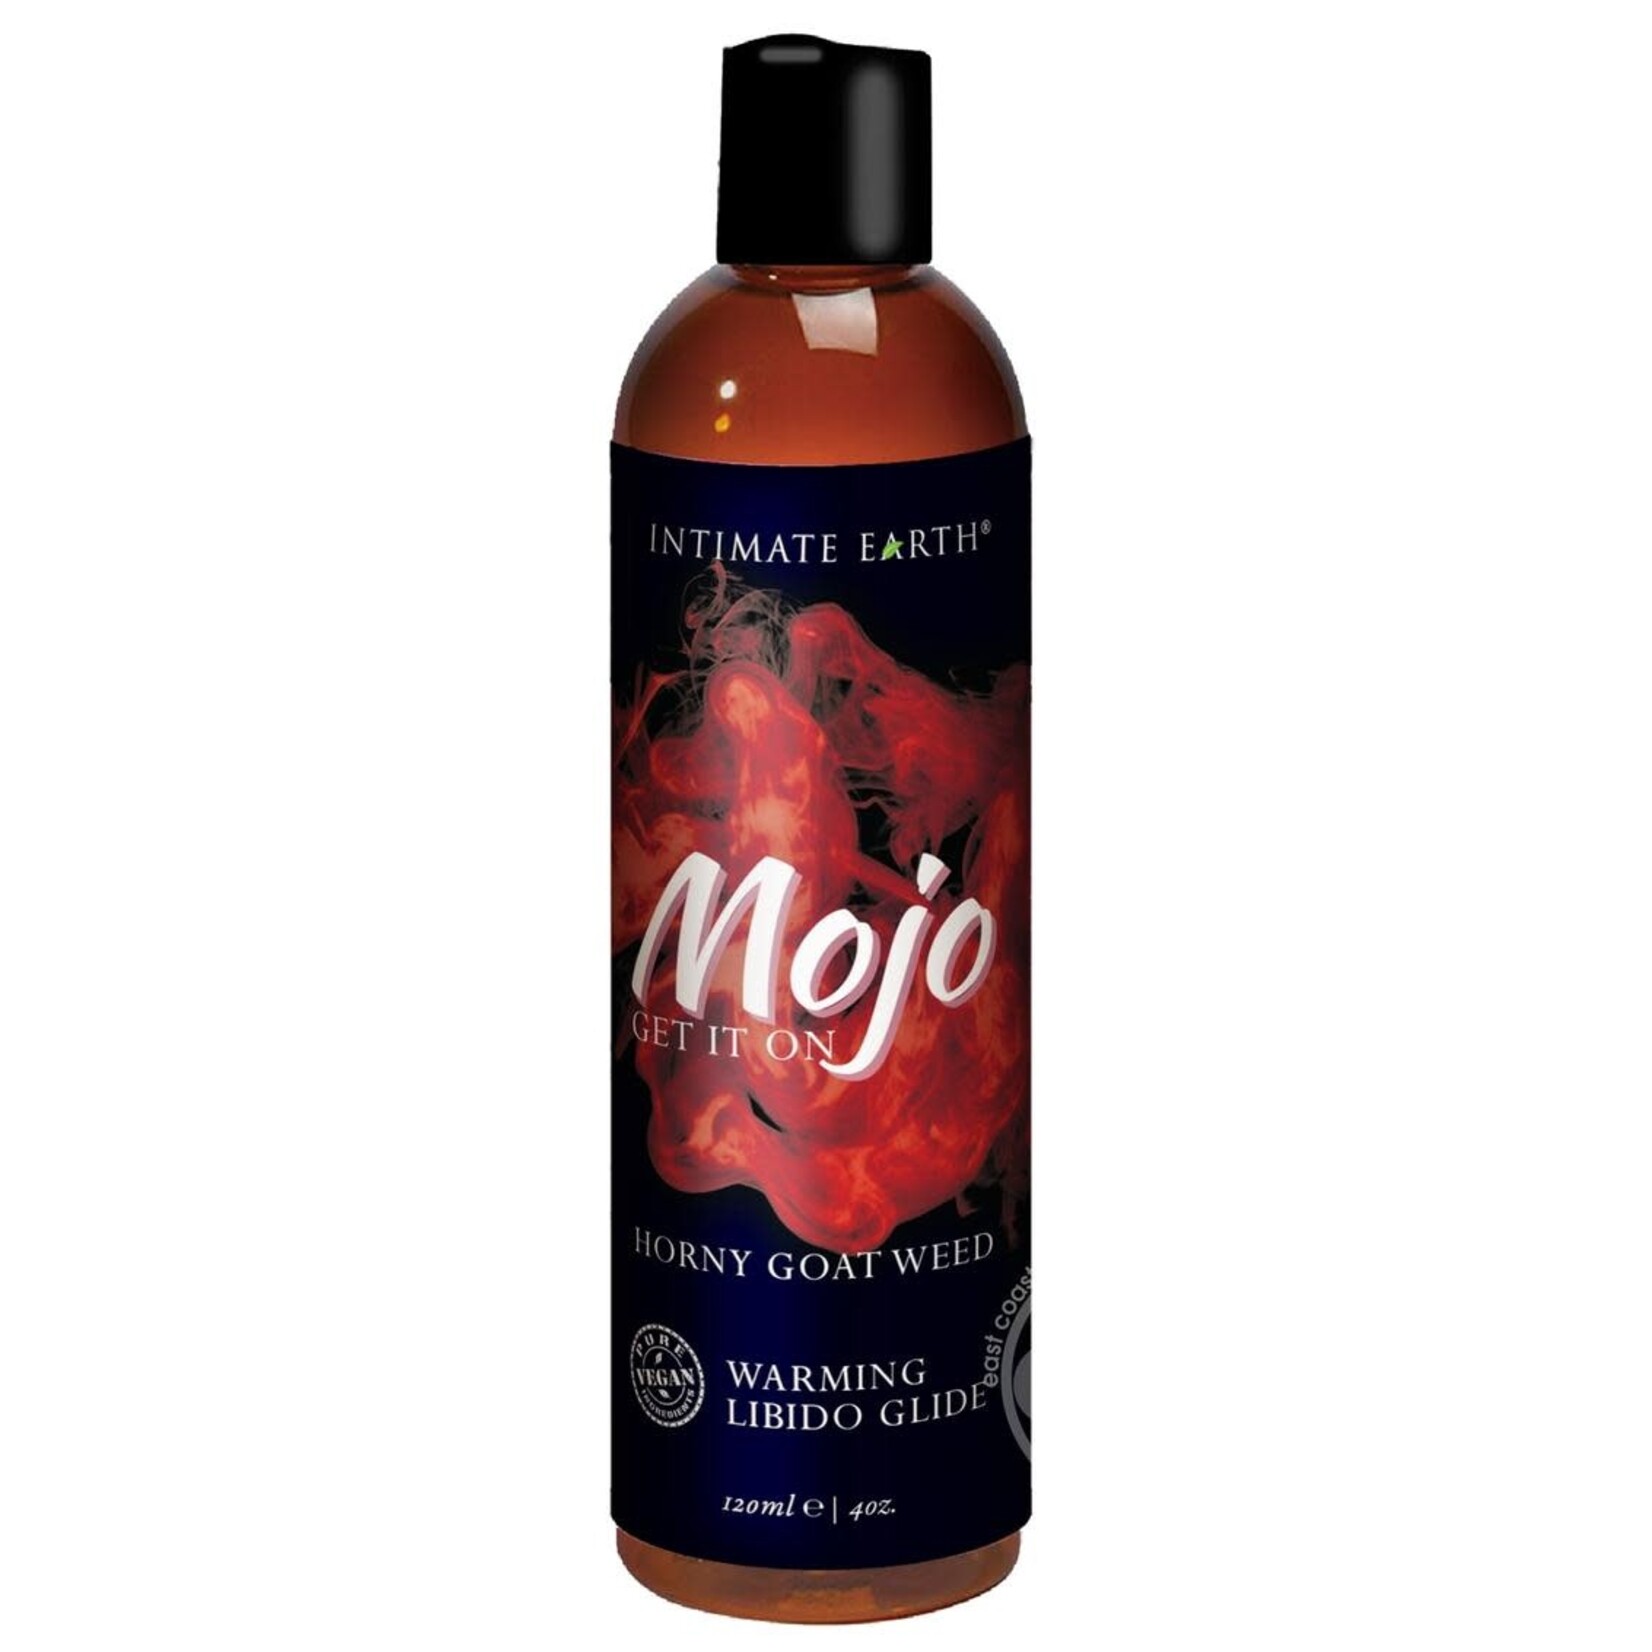 Intimate Earth Mojo Get It On Horny Goat Weed Warming Libido Glide